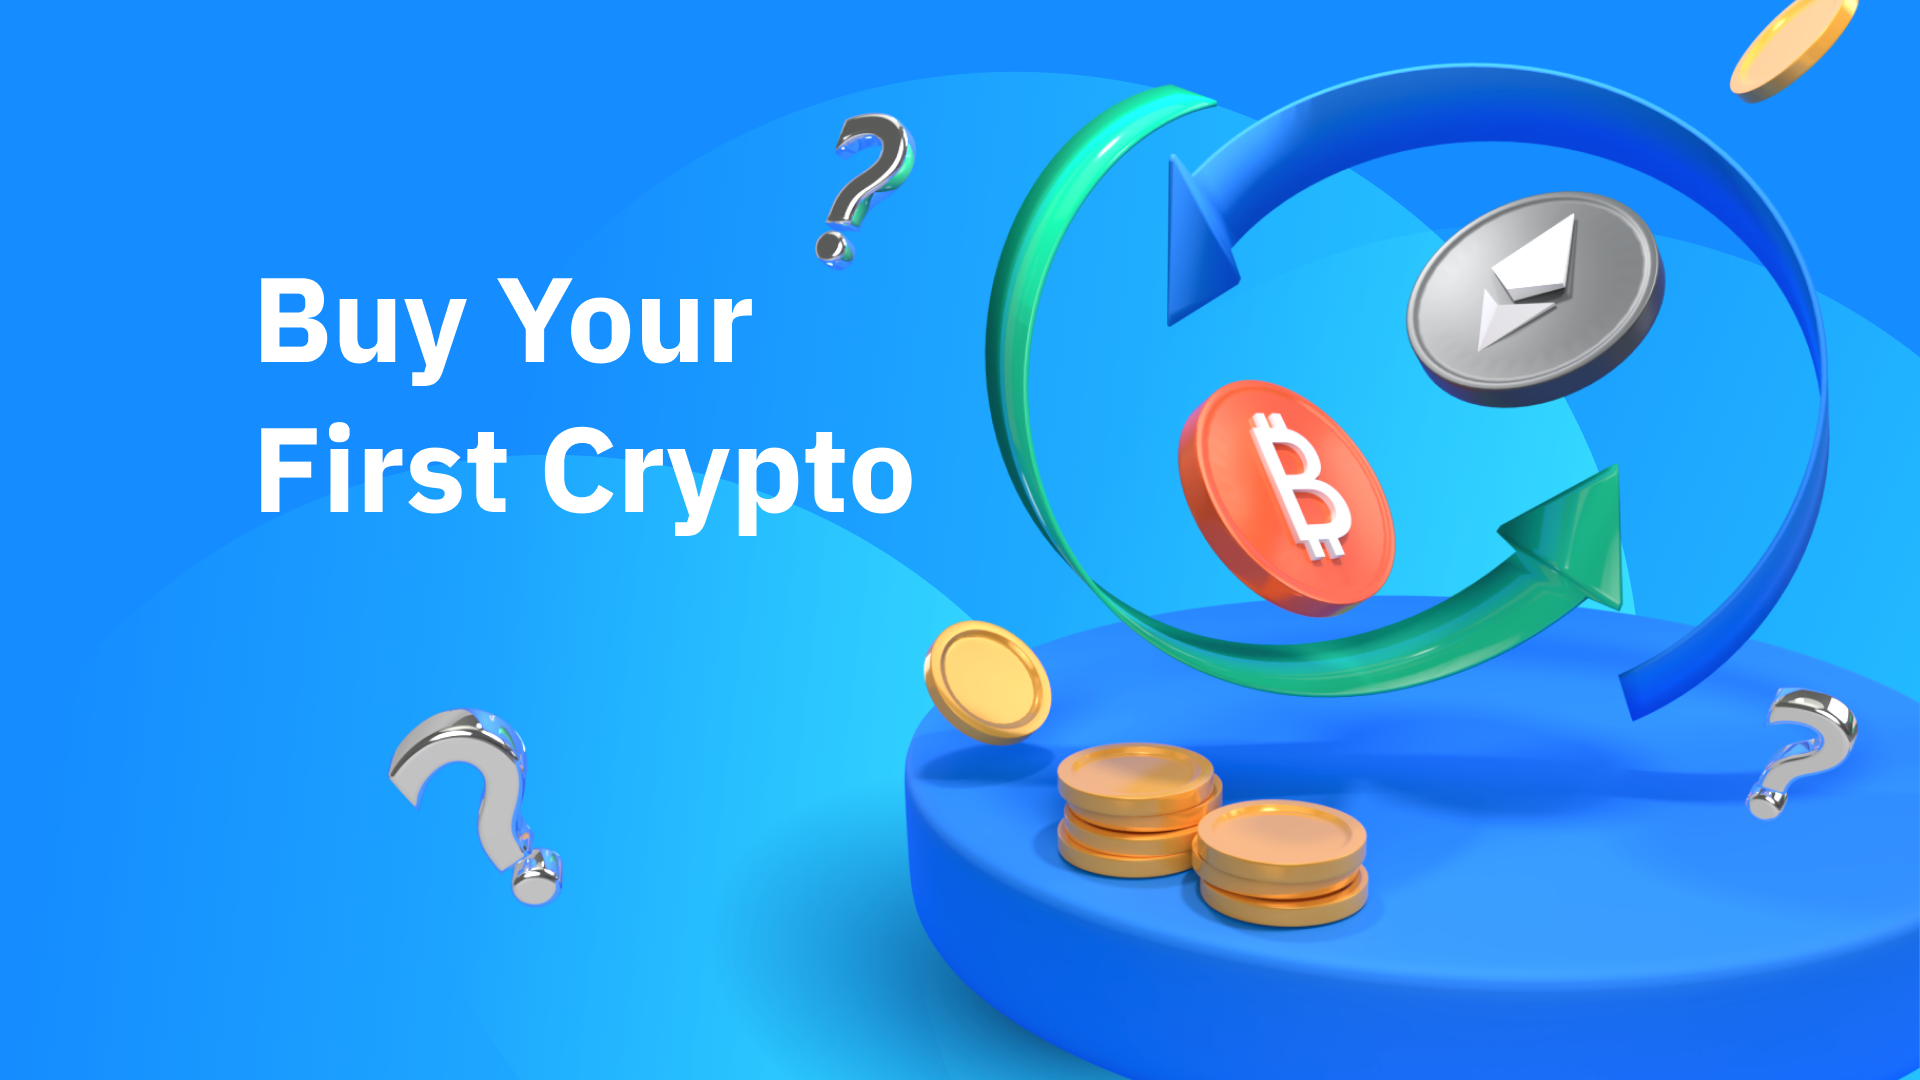 How To Buy Your First Crypto On BTSE